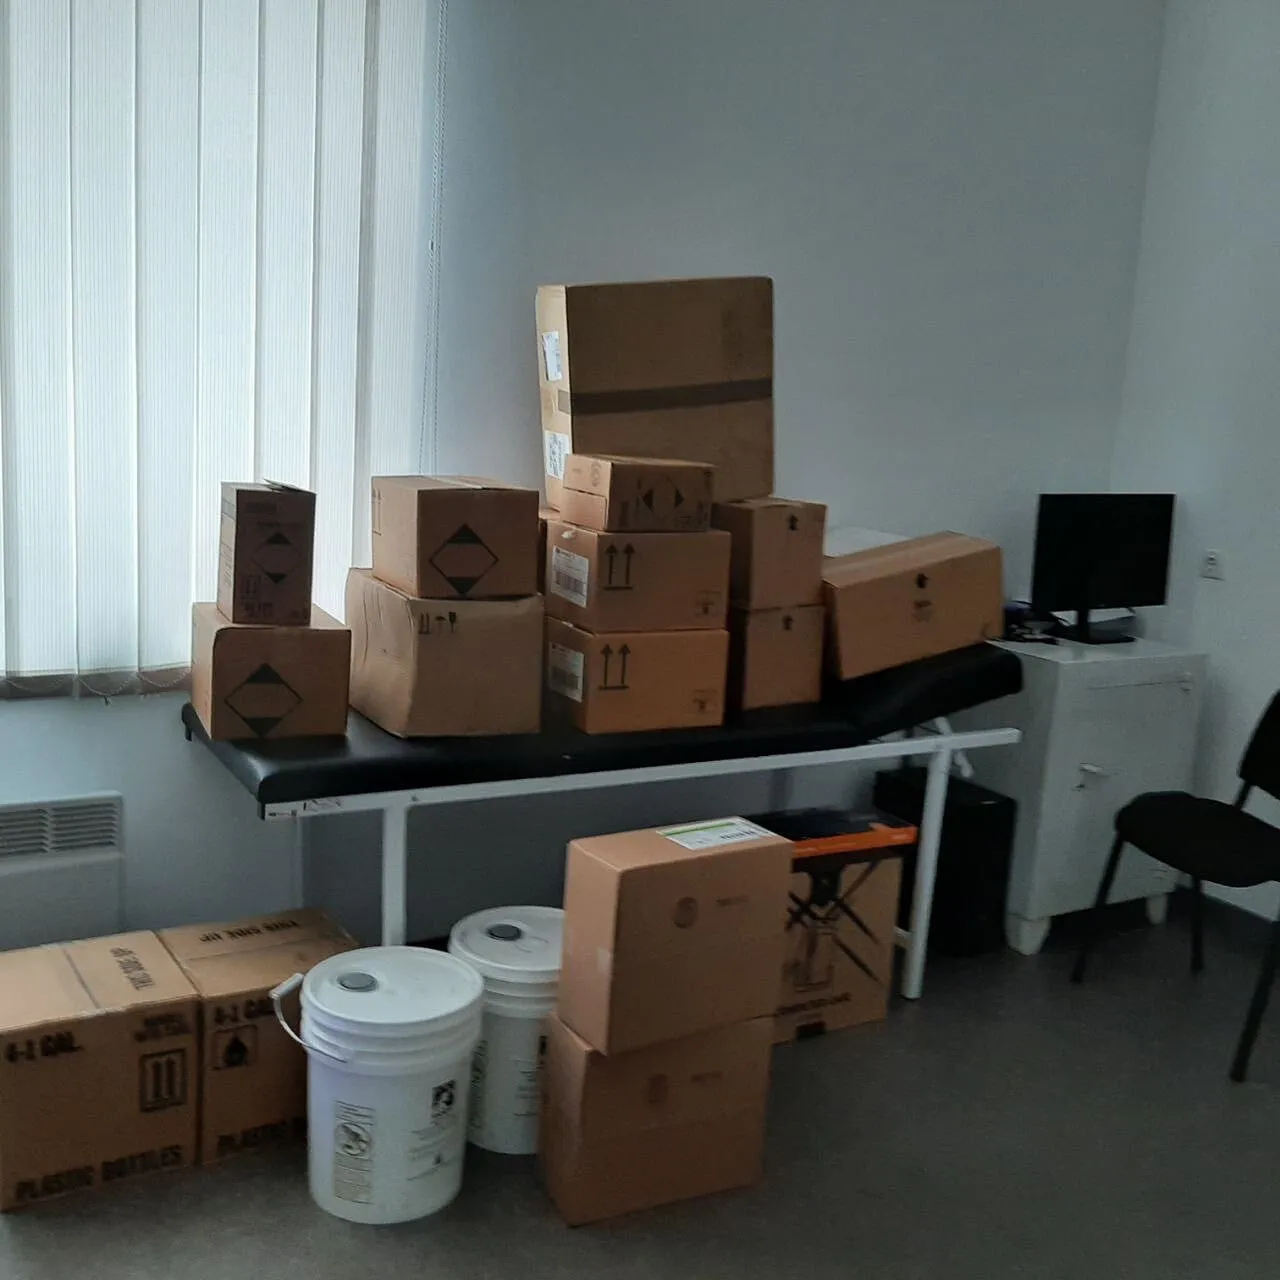 a room filled with lots of boxes and boxes on top of a table.